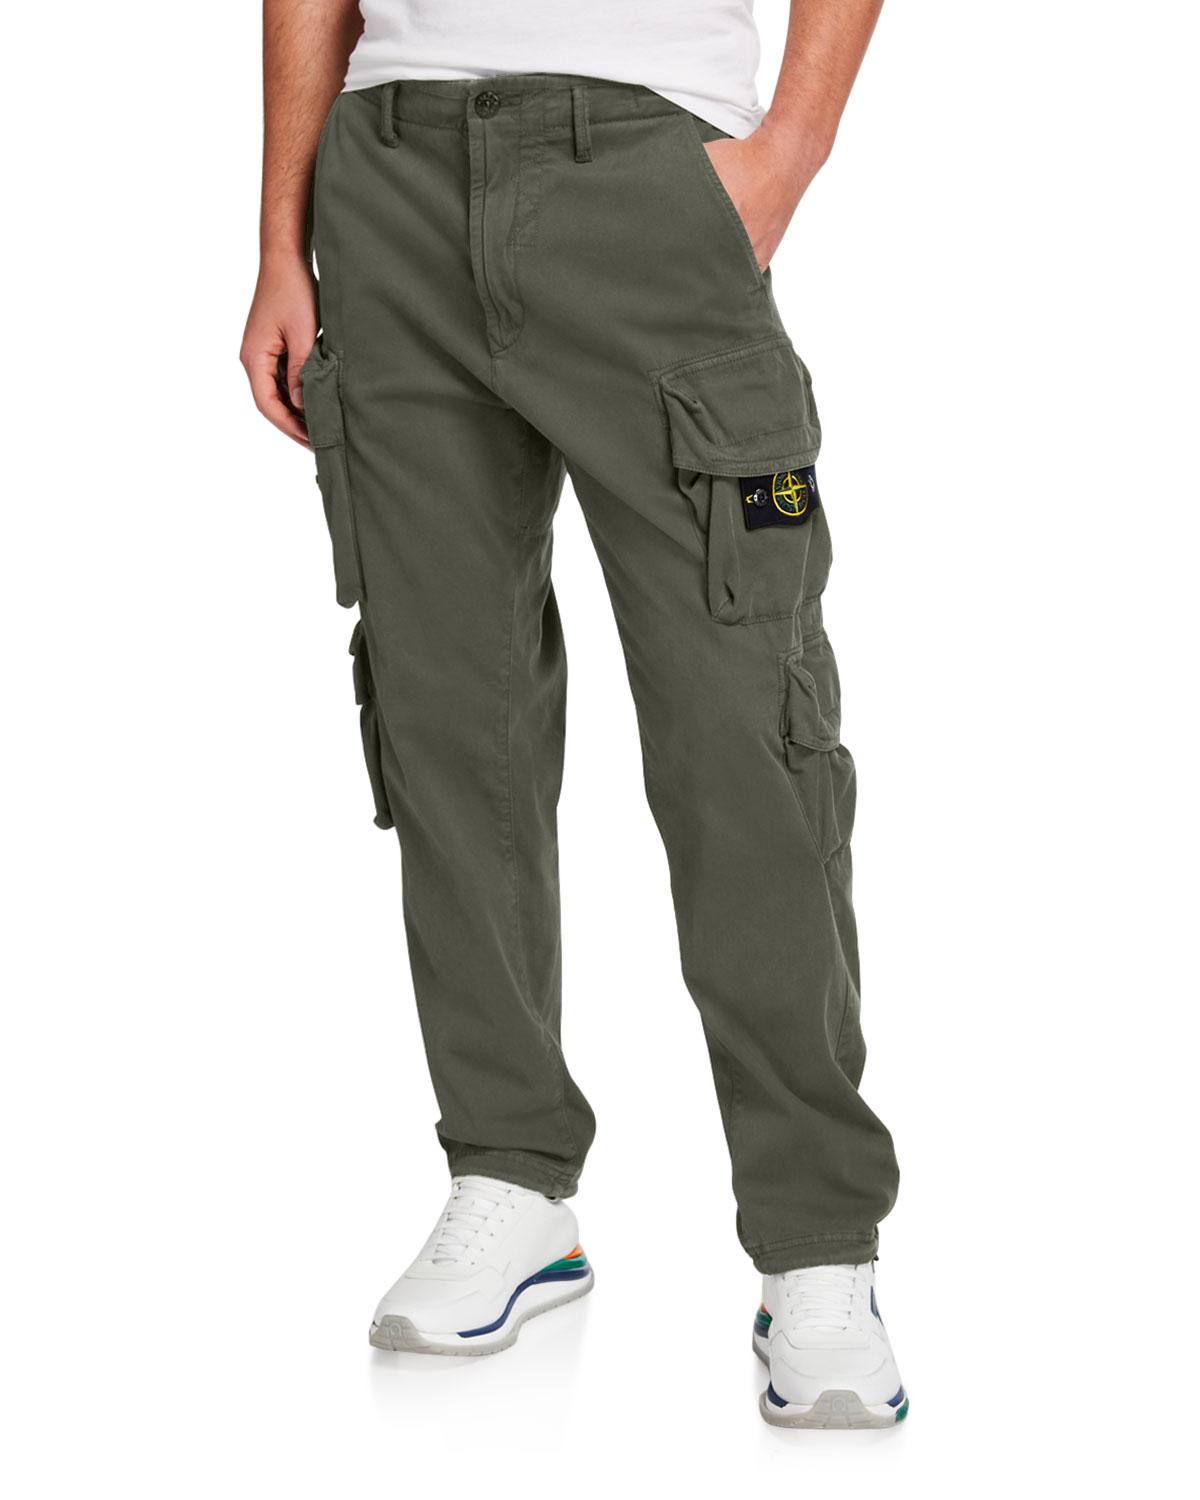 Stone Island Cargo Pants Olive Hot Sale, SAVE 45% - aveclumiere.com